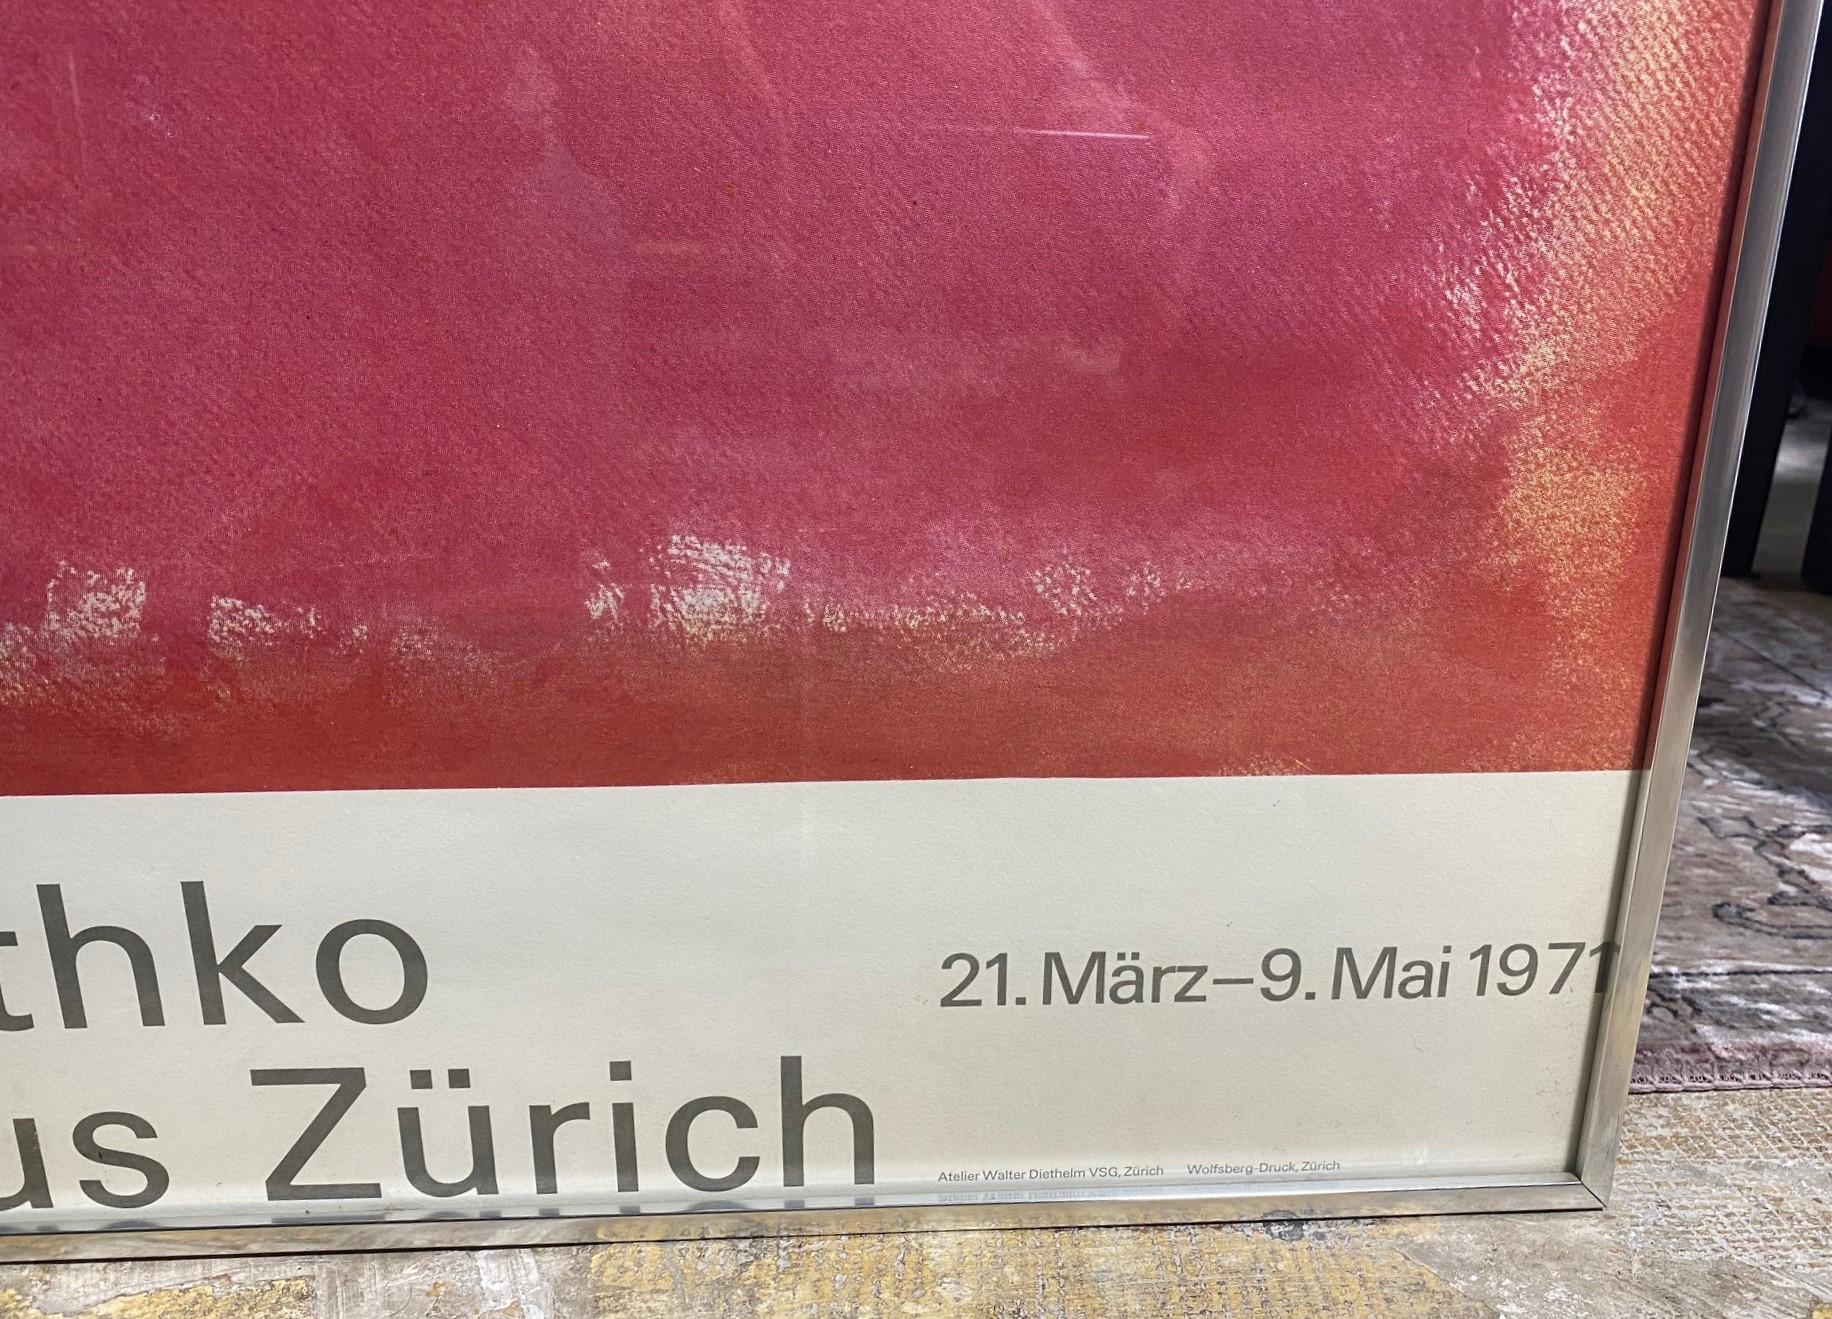 Swiss Mark Rothko Limited Edition Vintage Original Exhibition Lithograph Poster Zurich